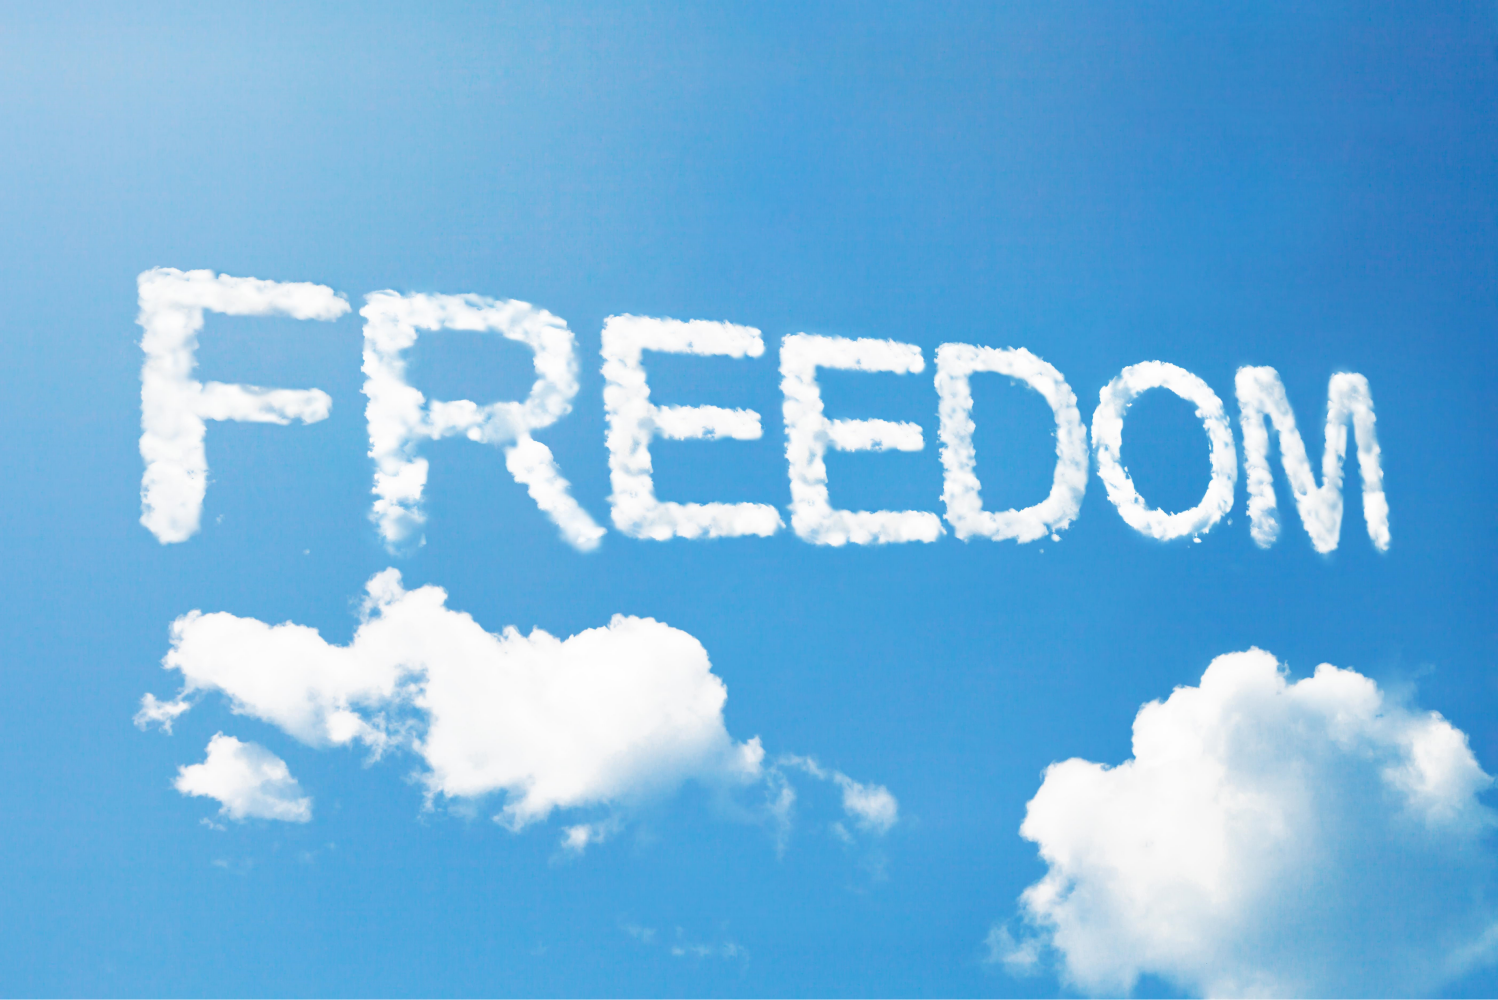 The Word Freedom Written In Clouds